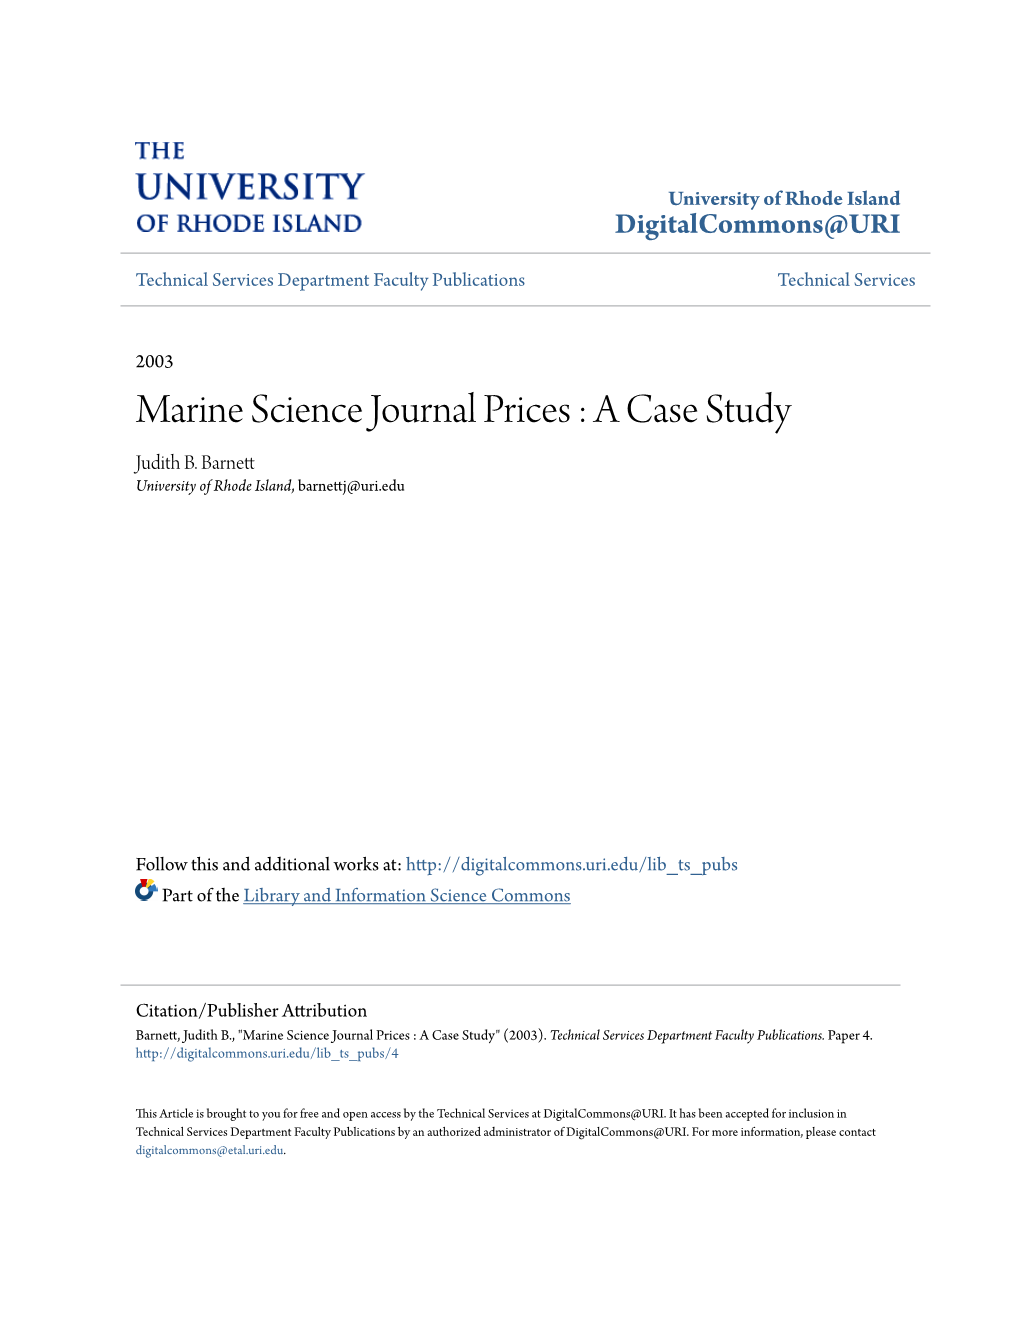 Marine Science Journal Prices : a Case Study Judith B